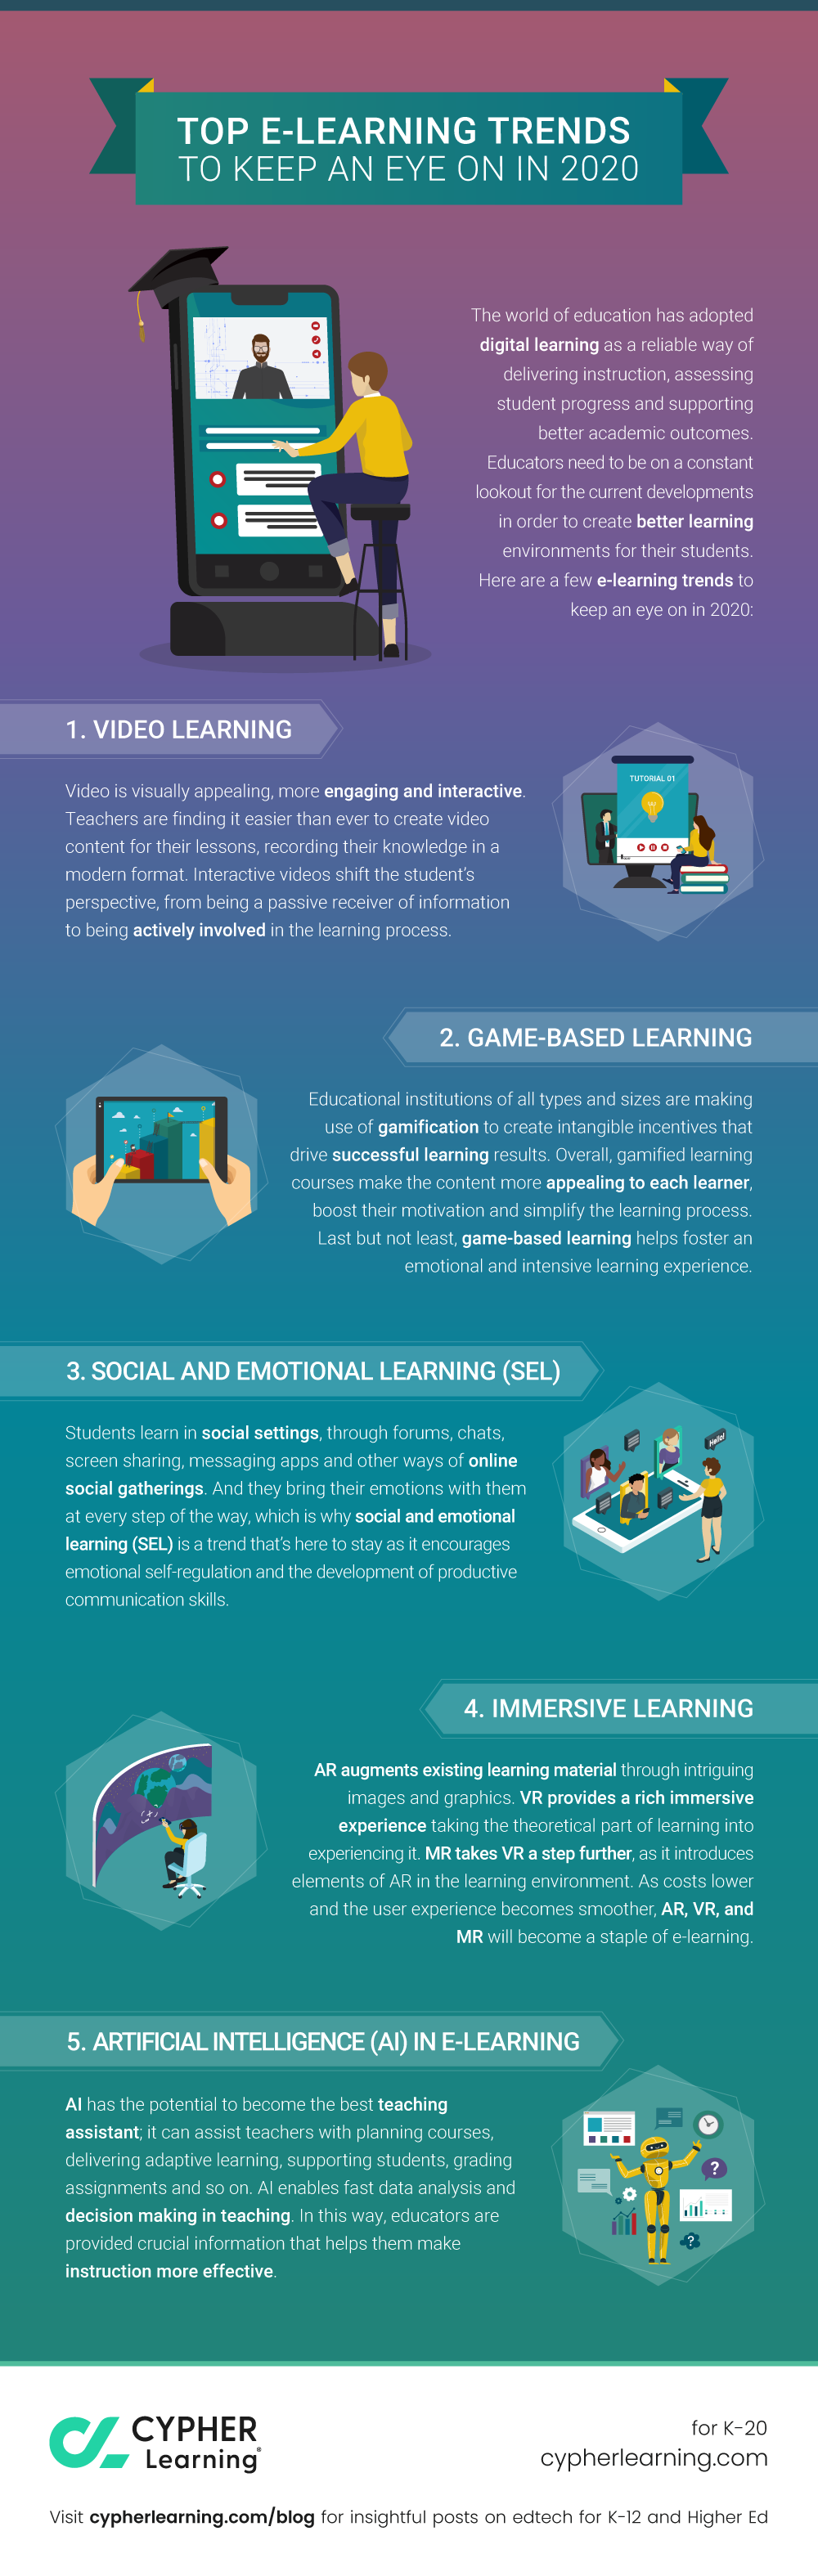 Top e-learning trends to keep an eye on in 2020